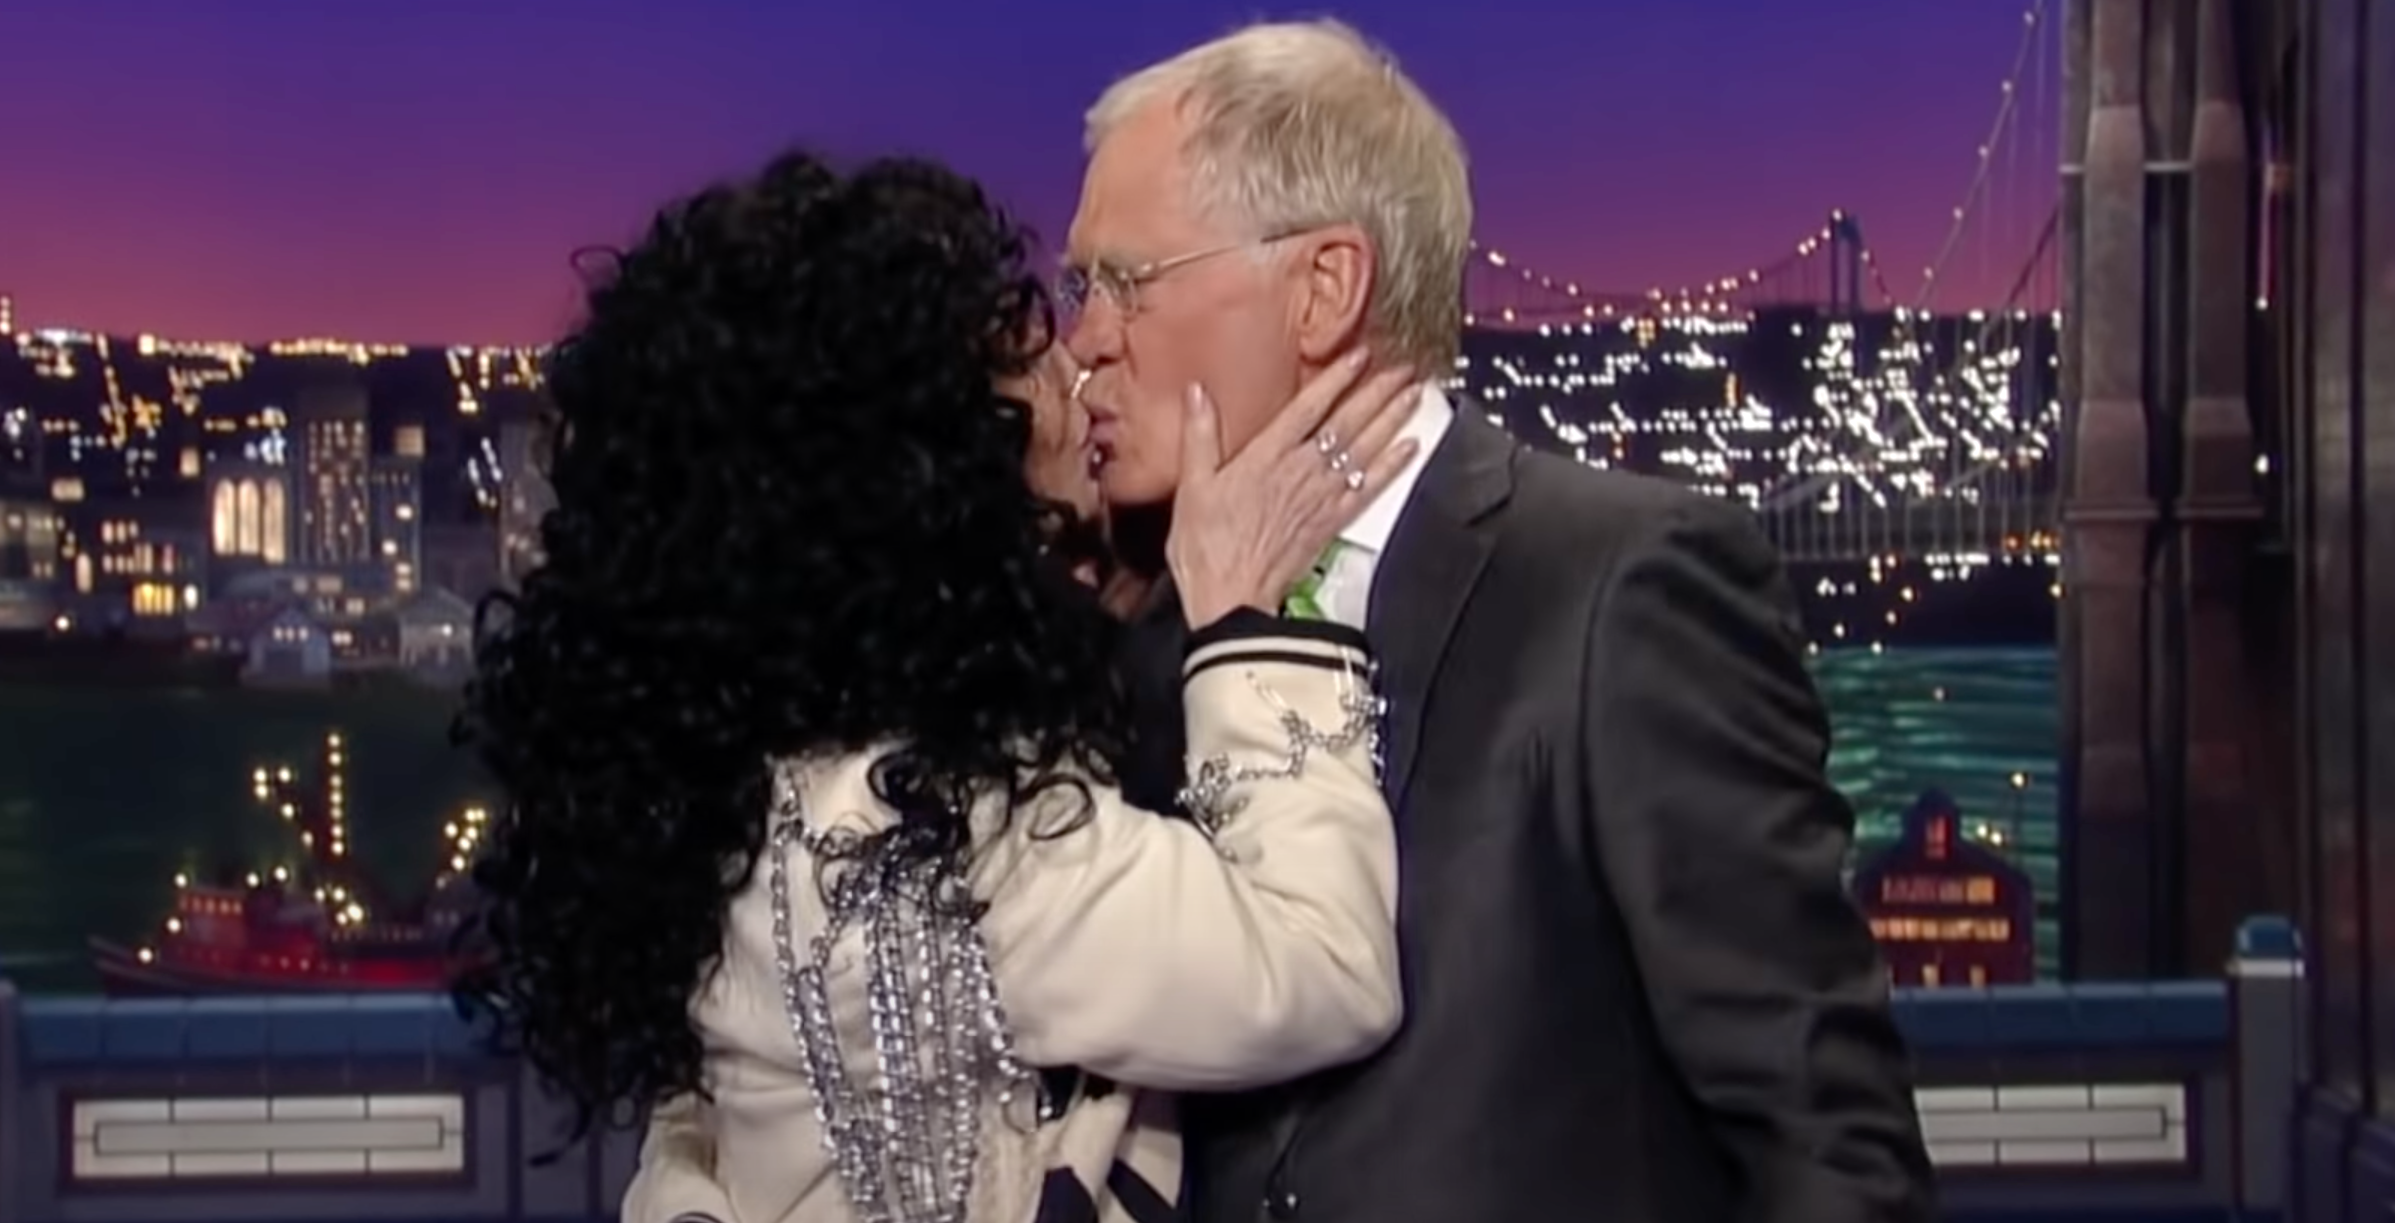 Cher Kissed David Letterman As An Apology In 2015